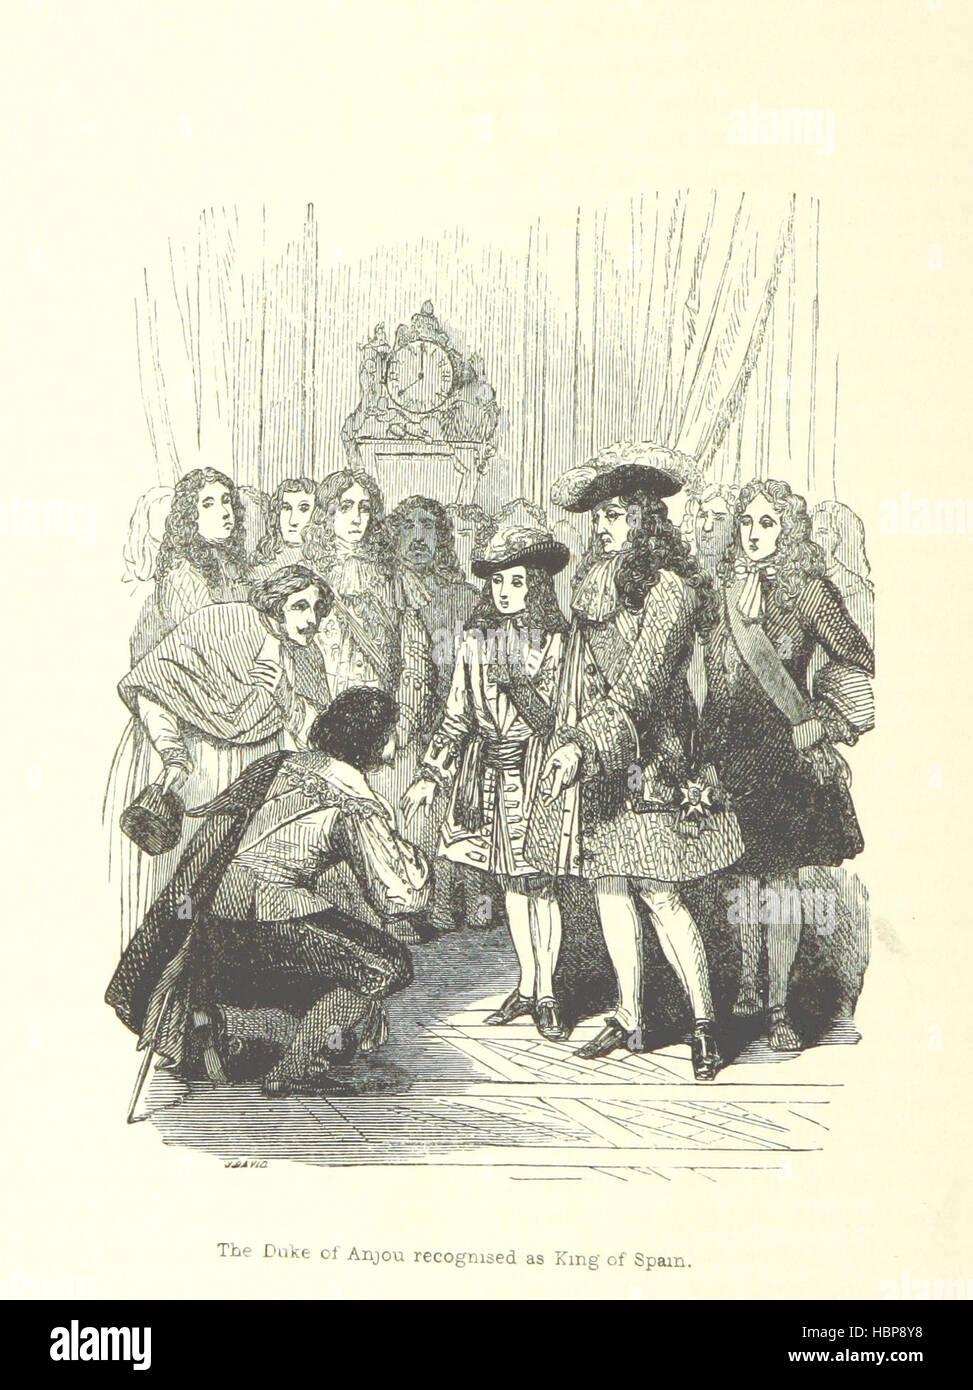 Image taken from page 568 of 'The Pictorial History of Stock Photo